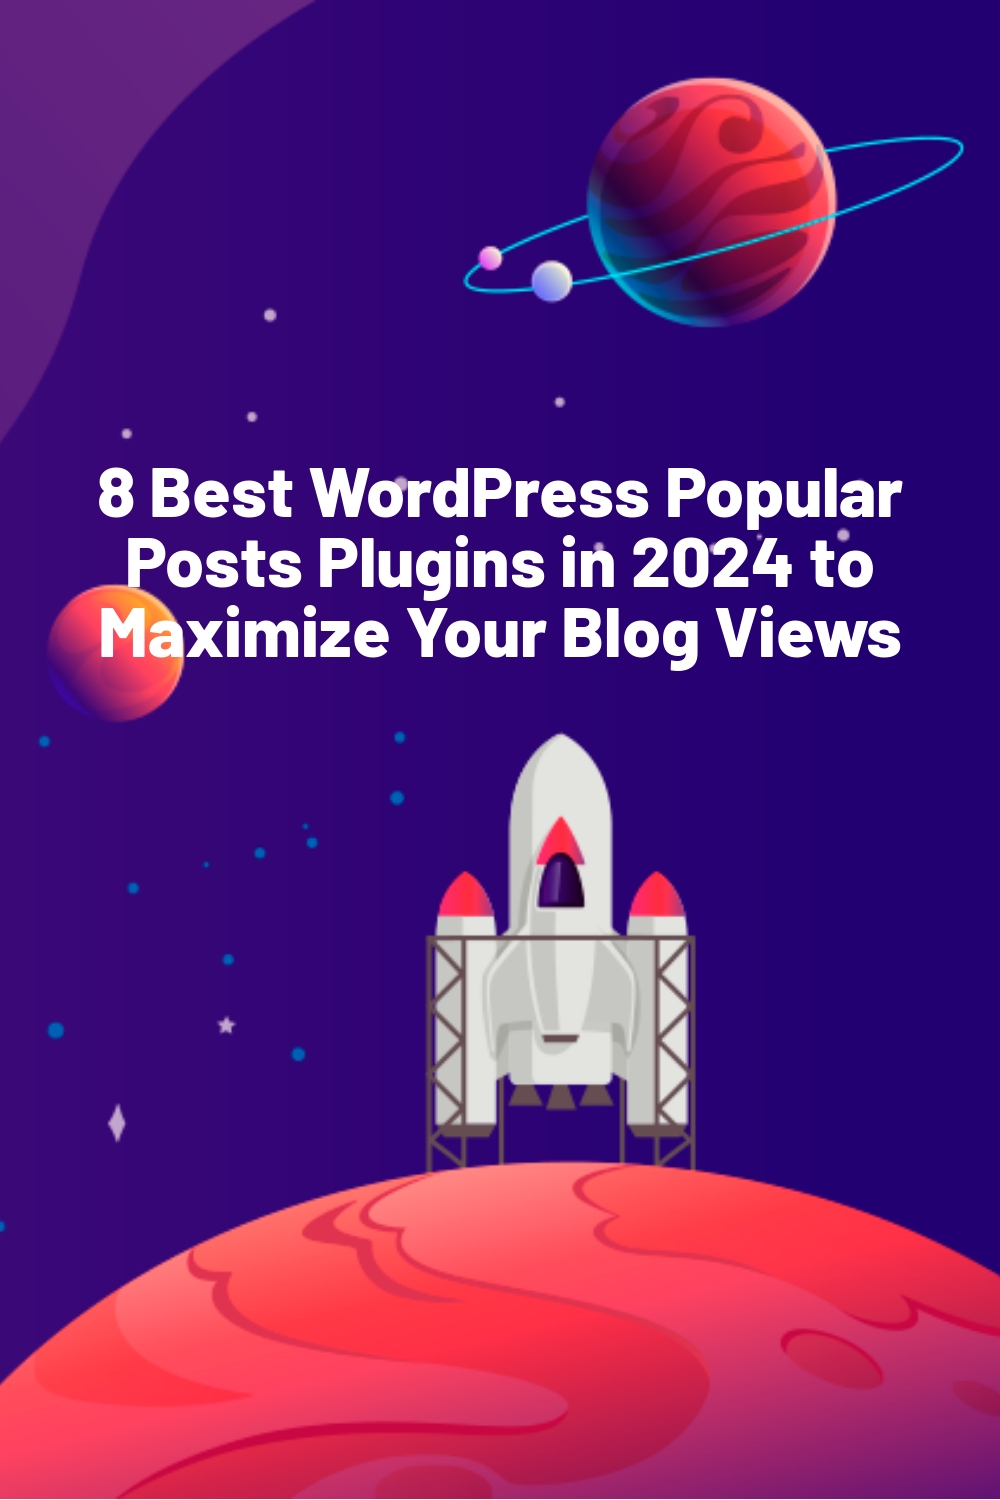 8 Best WordPress Popular Posts Plugins in 2024 to Maximize Your Blog Views